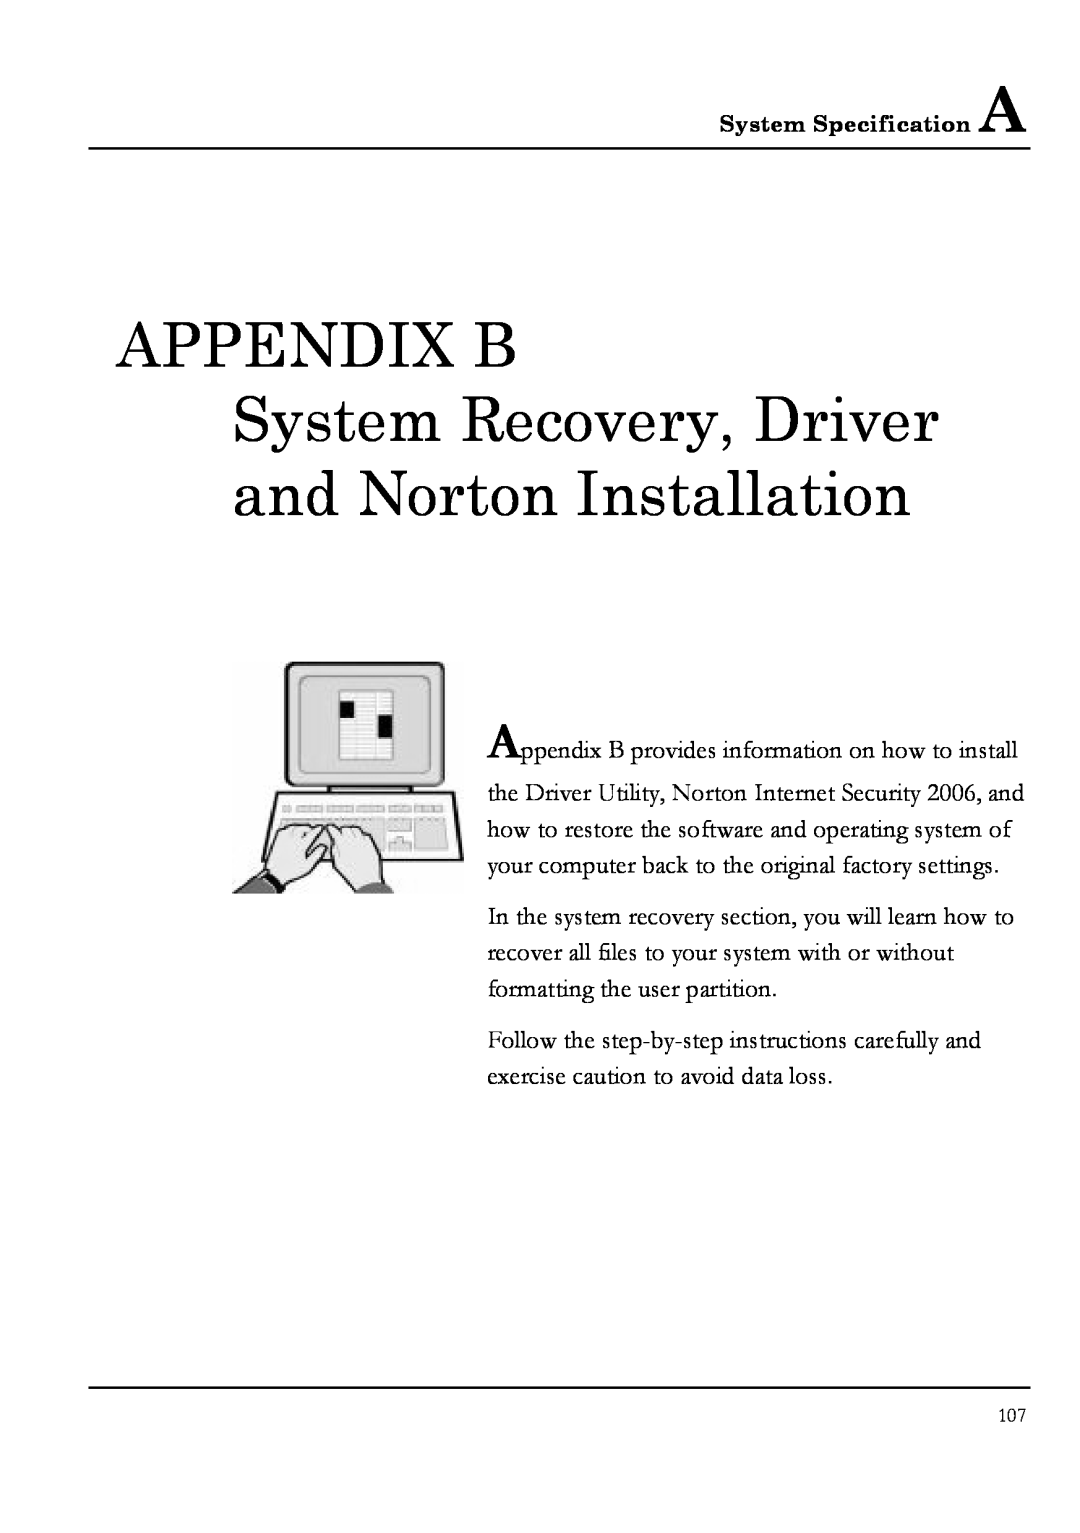 Everex NM3900W, NM4100W, NM3700W, NM3500W manual APPENDIX B System Recovery, Driver and Norton Installation 